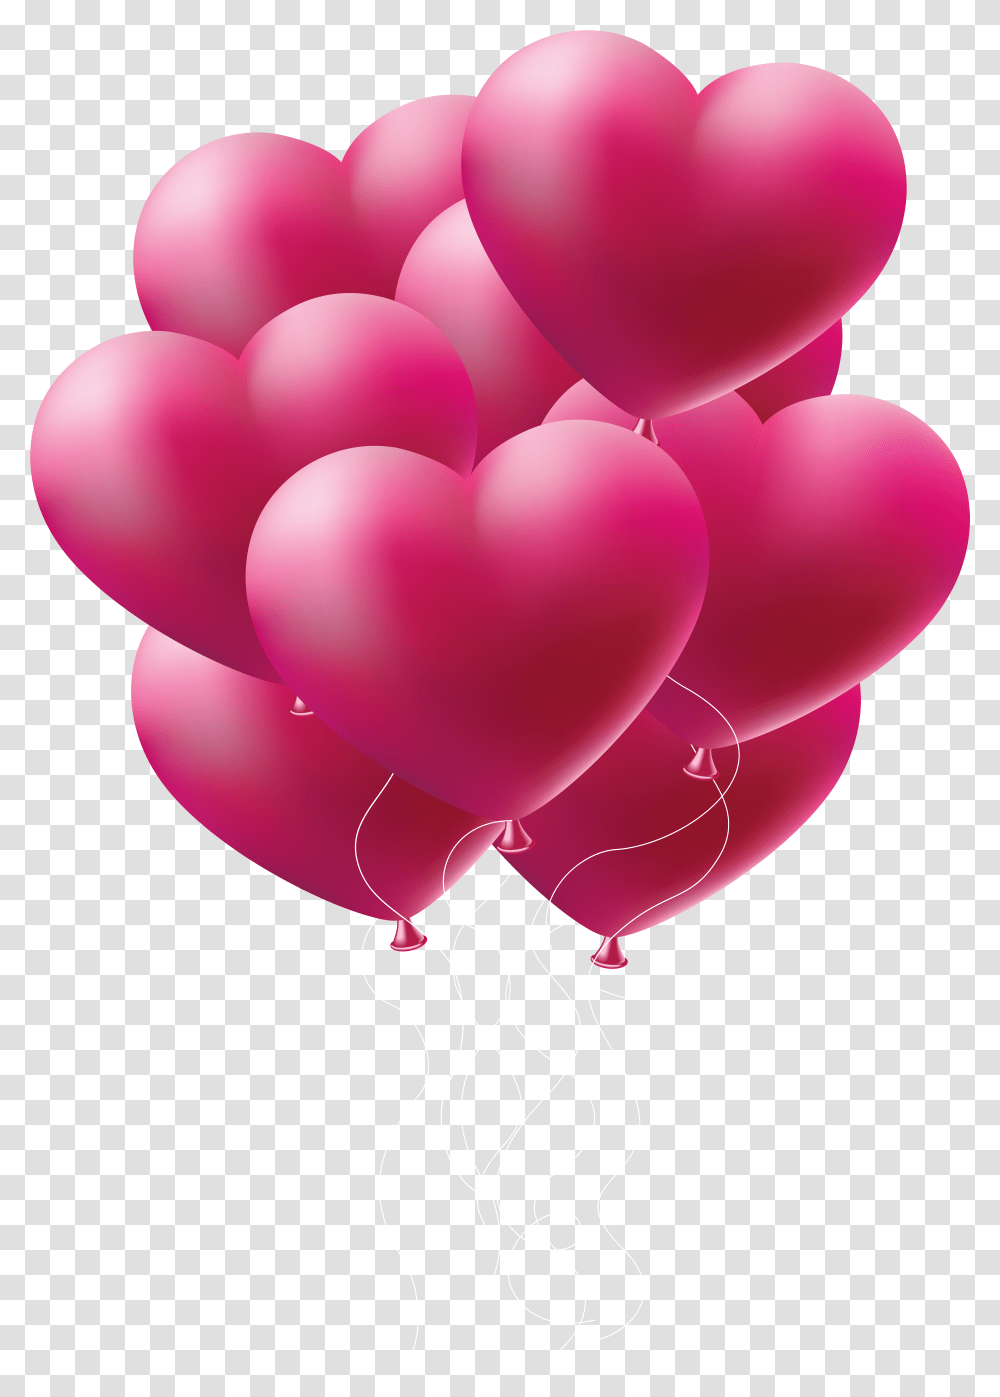 Clip Art Image Gallery Yopriceville Pink Heart Balloon Transparent Png